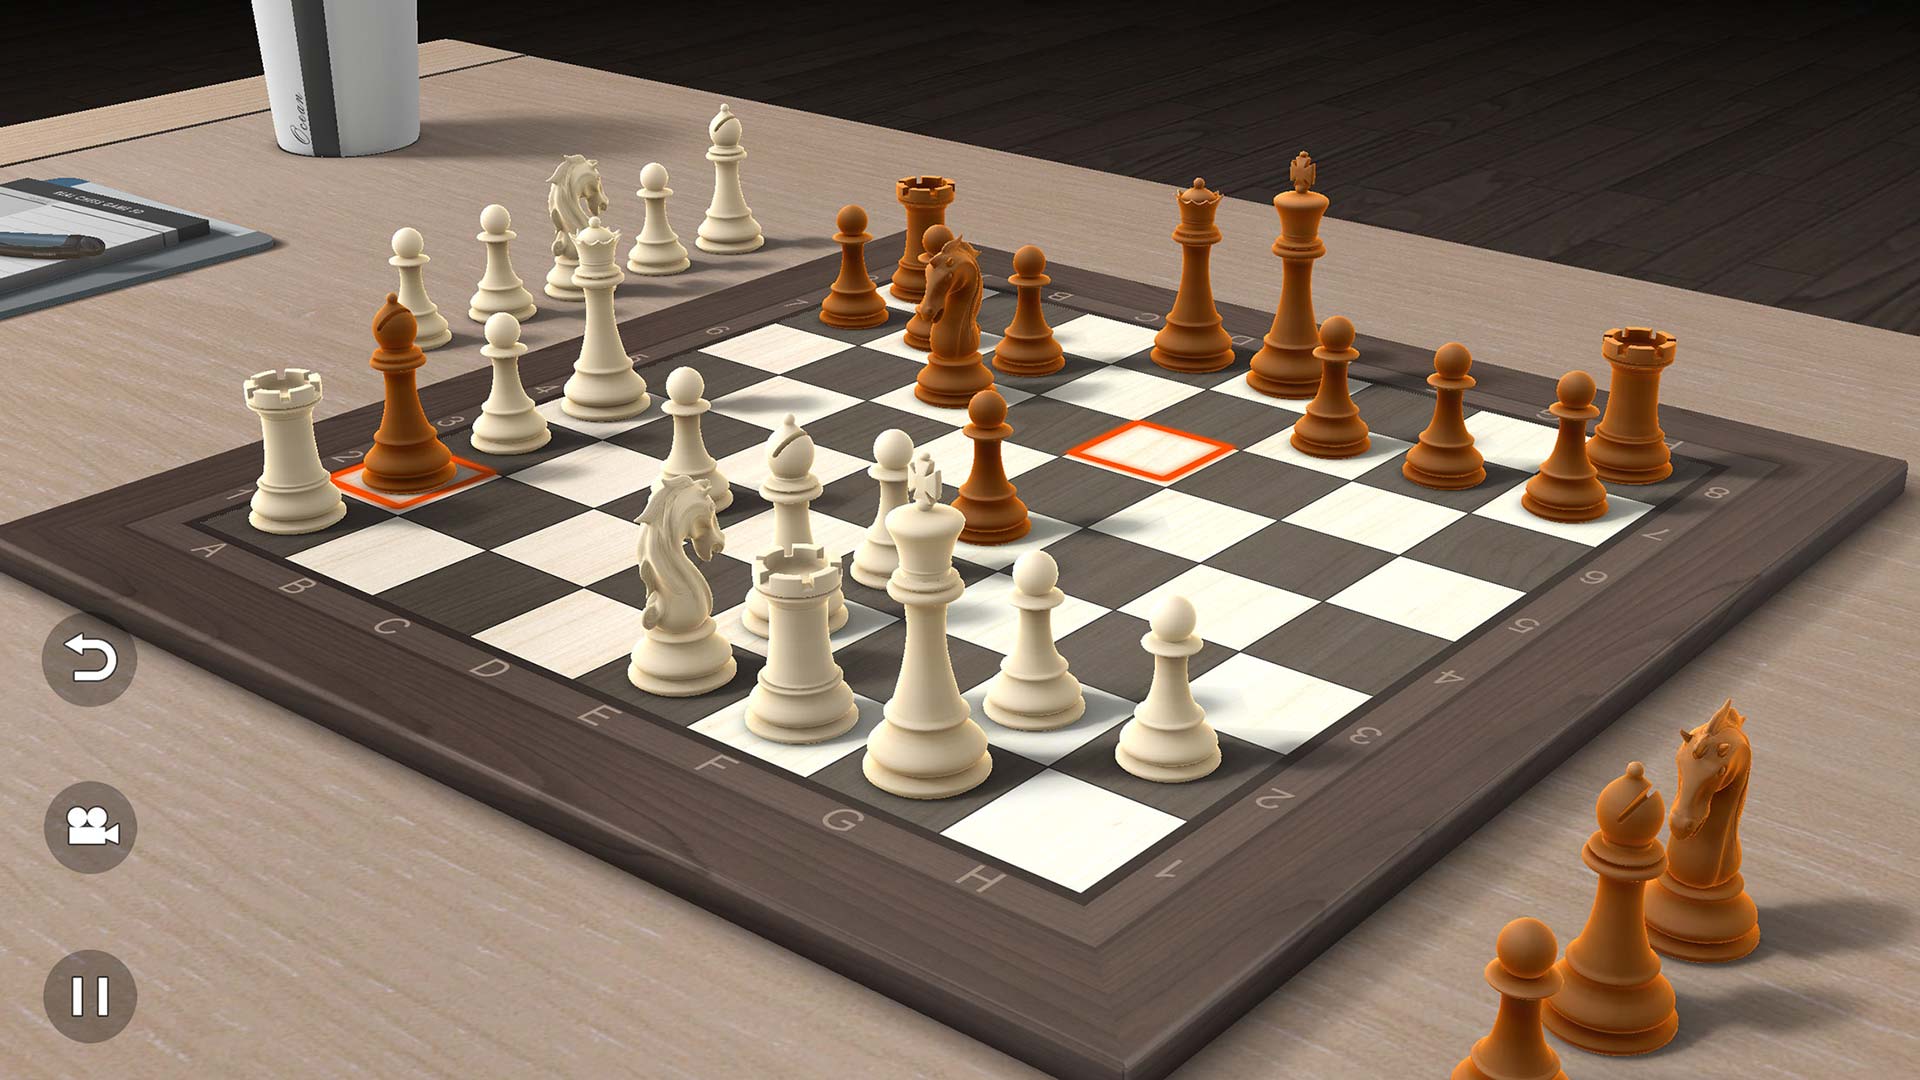 Real Chess 3D